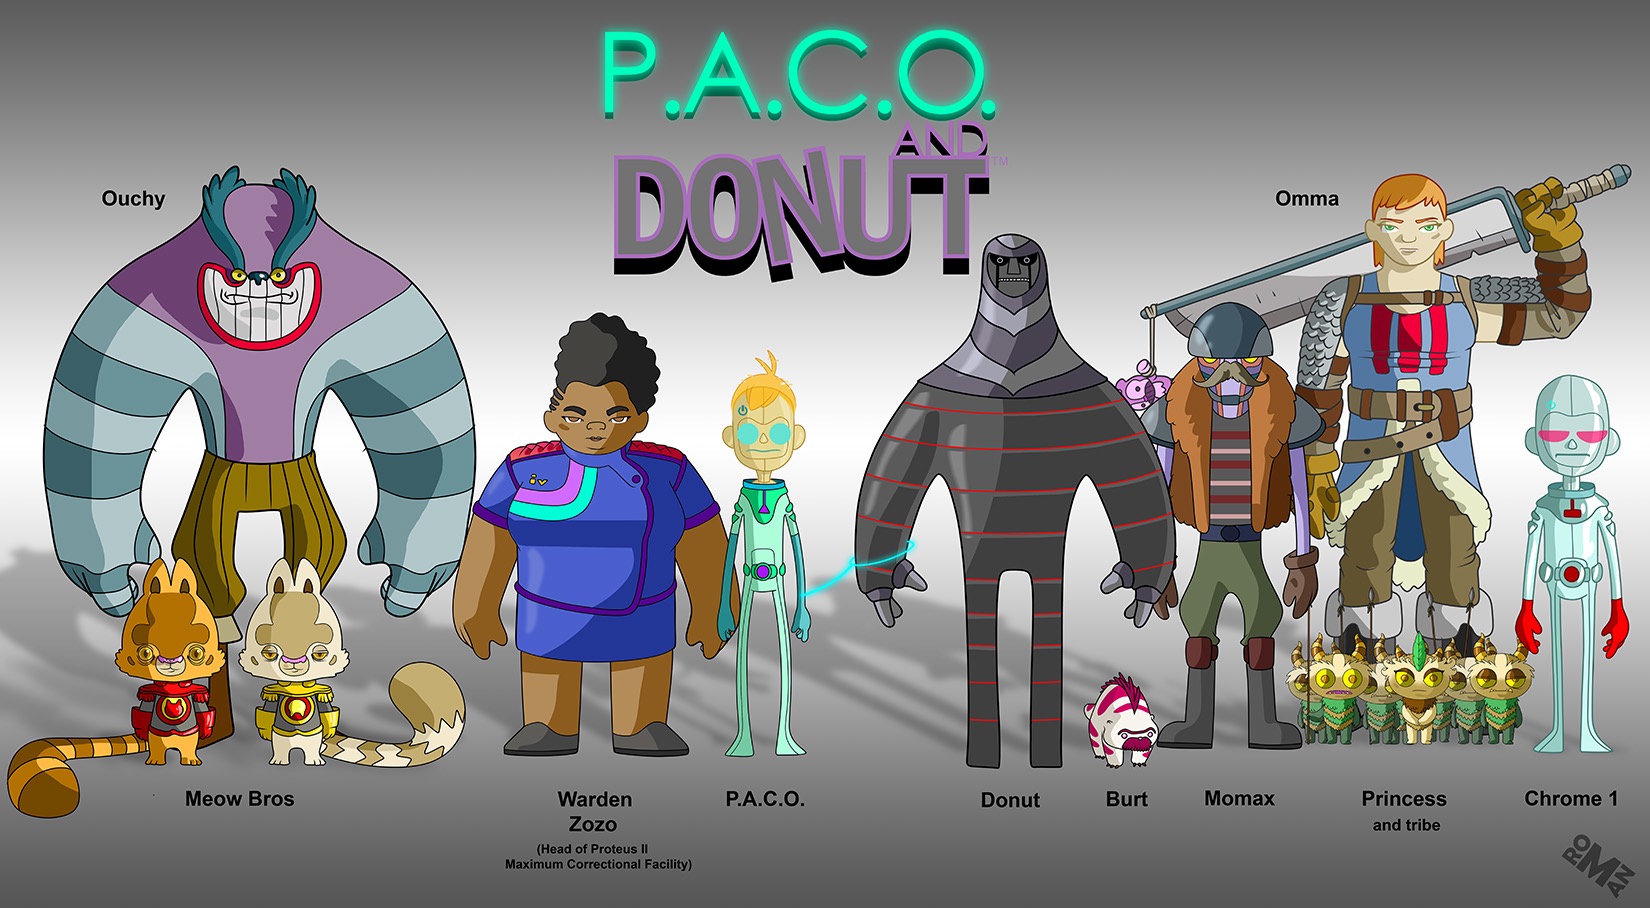 PACO_and_Donut_Cast.jpg